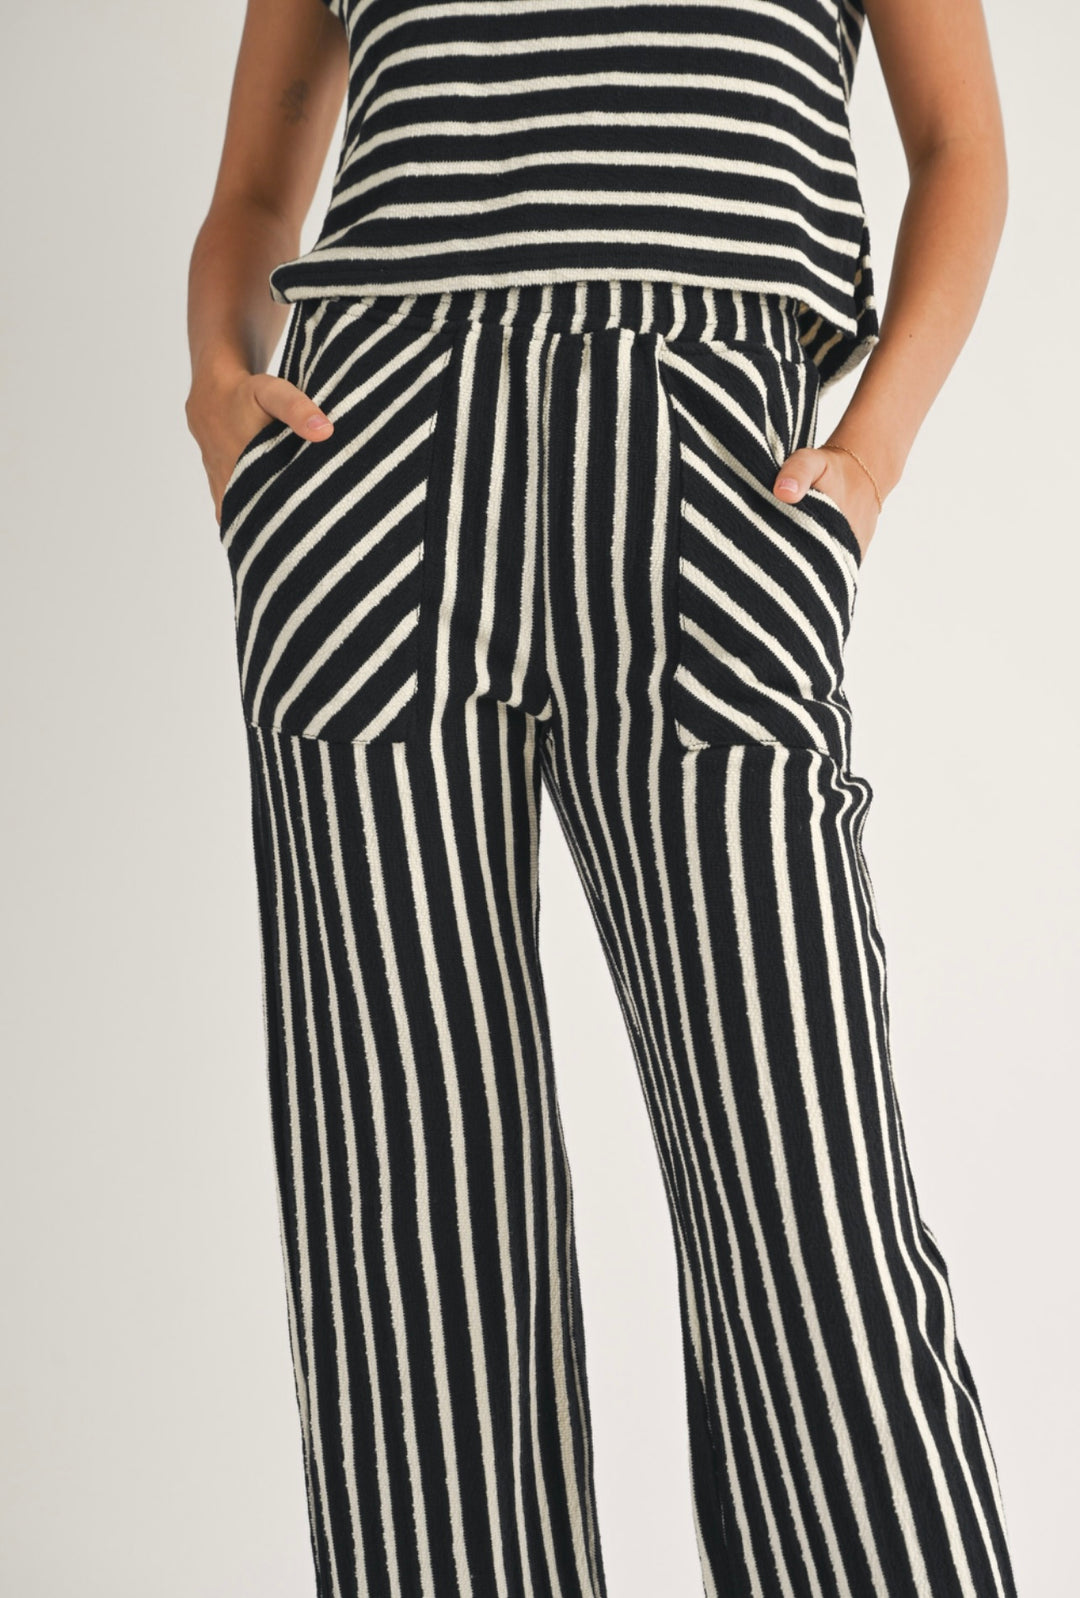 Textured Knit Black and White Stripe Knitted Pants